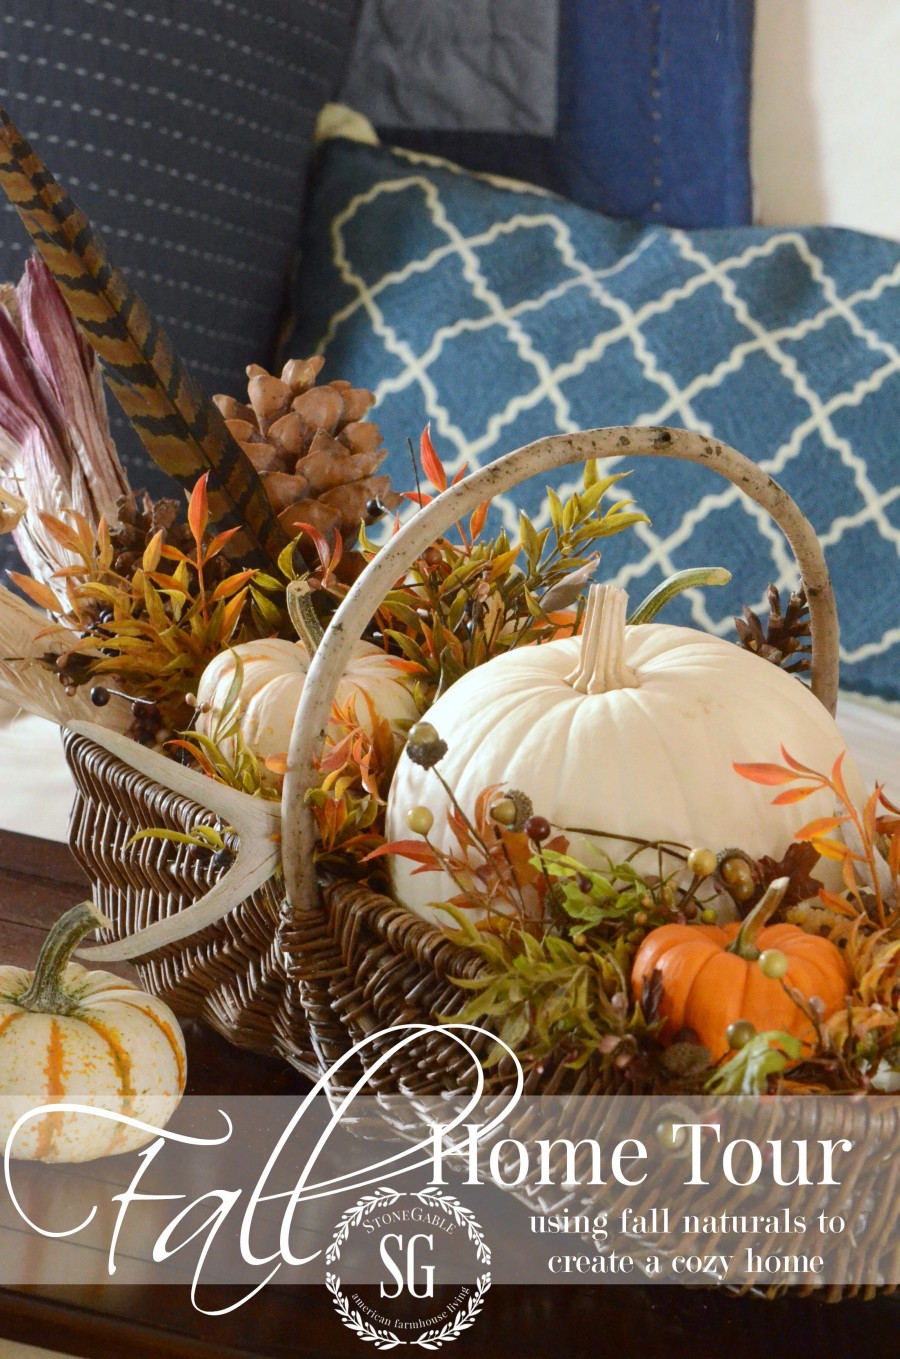 FALL HOME TOUR-celebrating fall with natural elements- lots of inspiration-stonegableblog.com